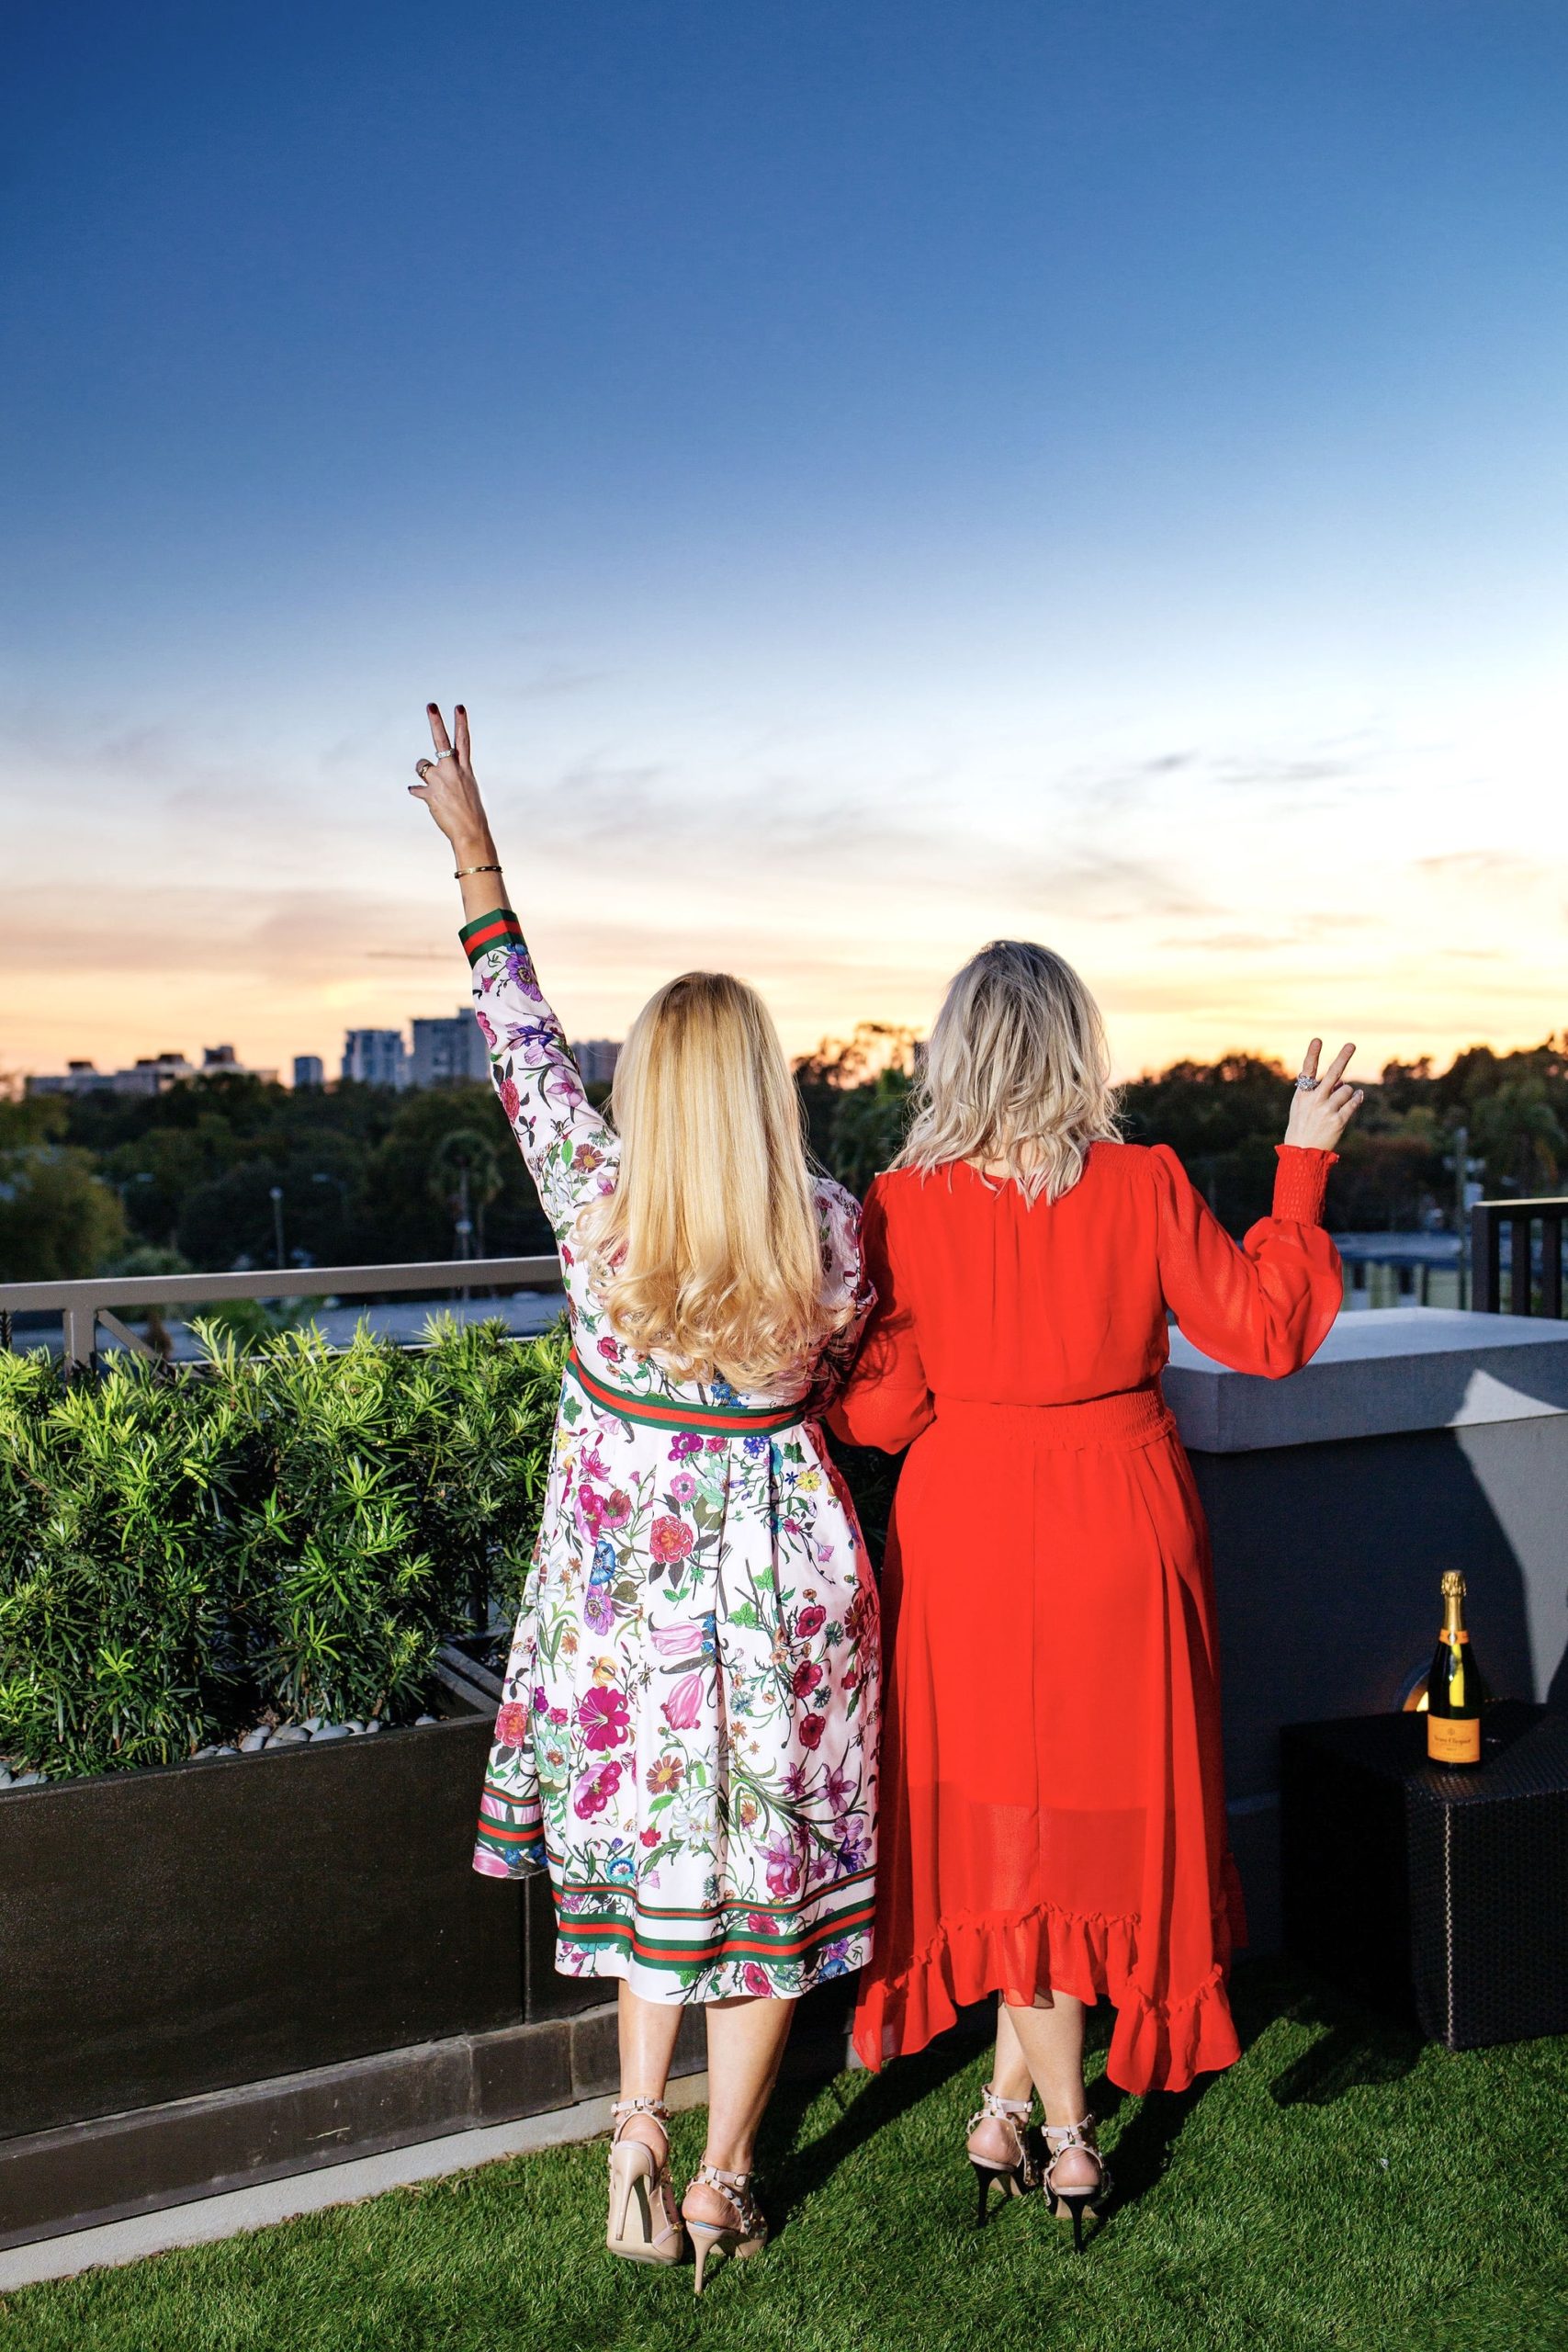 Jenn Truman Fashion and Style Blogger @jtstjtst11 is standing admiring the beautiful sunset skyline at Edge Rooftop Cocktail Lounge Epicurean Hotel, Autograph Collection. She is wearing a pink floral dress from amazon fashion and nude studded heels from amazon. She's holding the peace sign up with her first two fingers admiring the sunset.